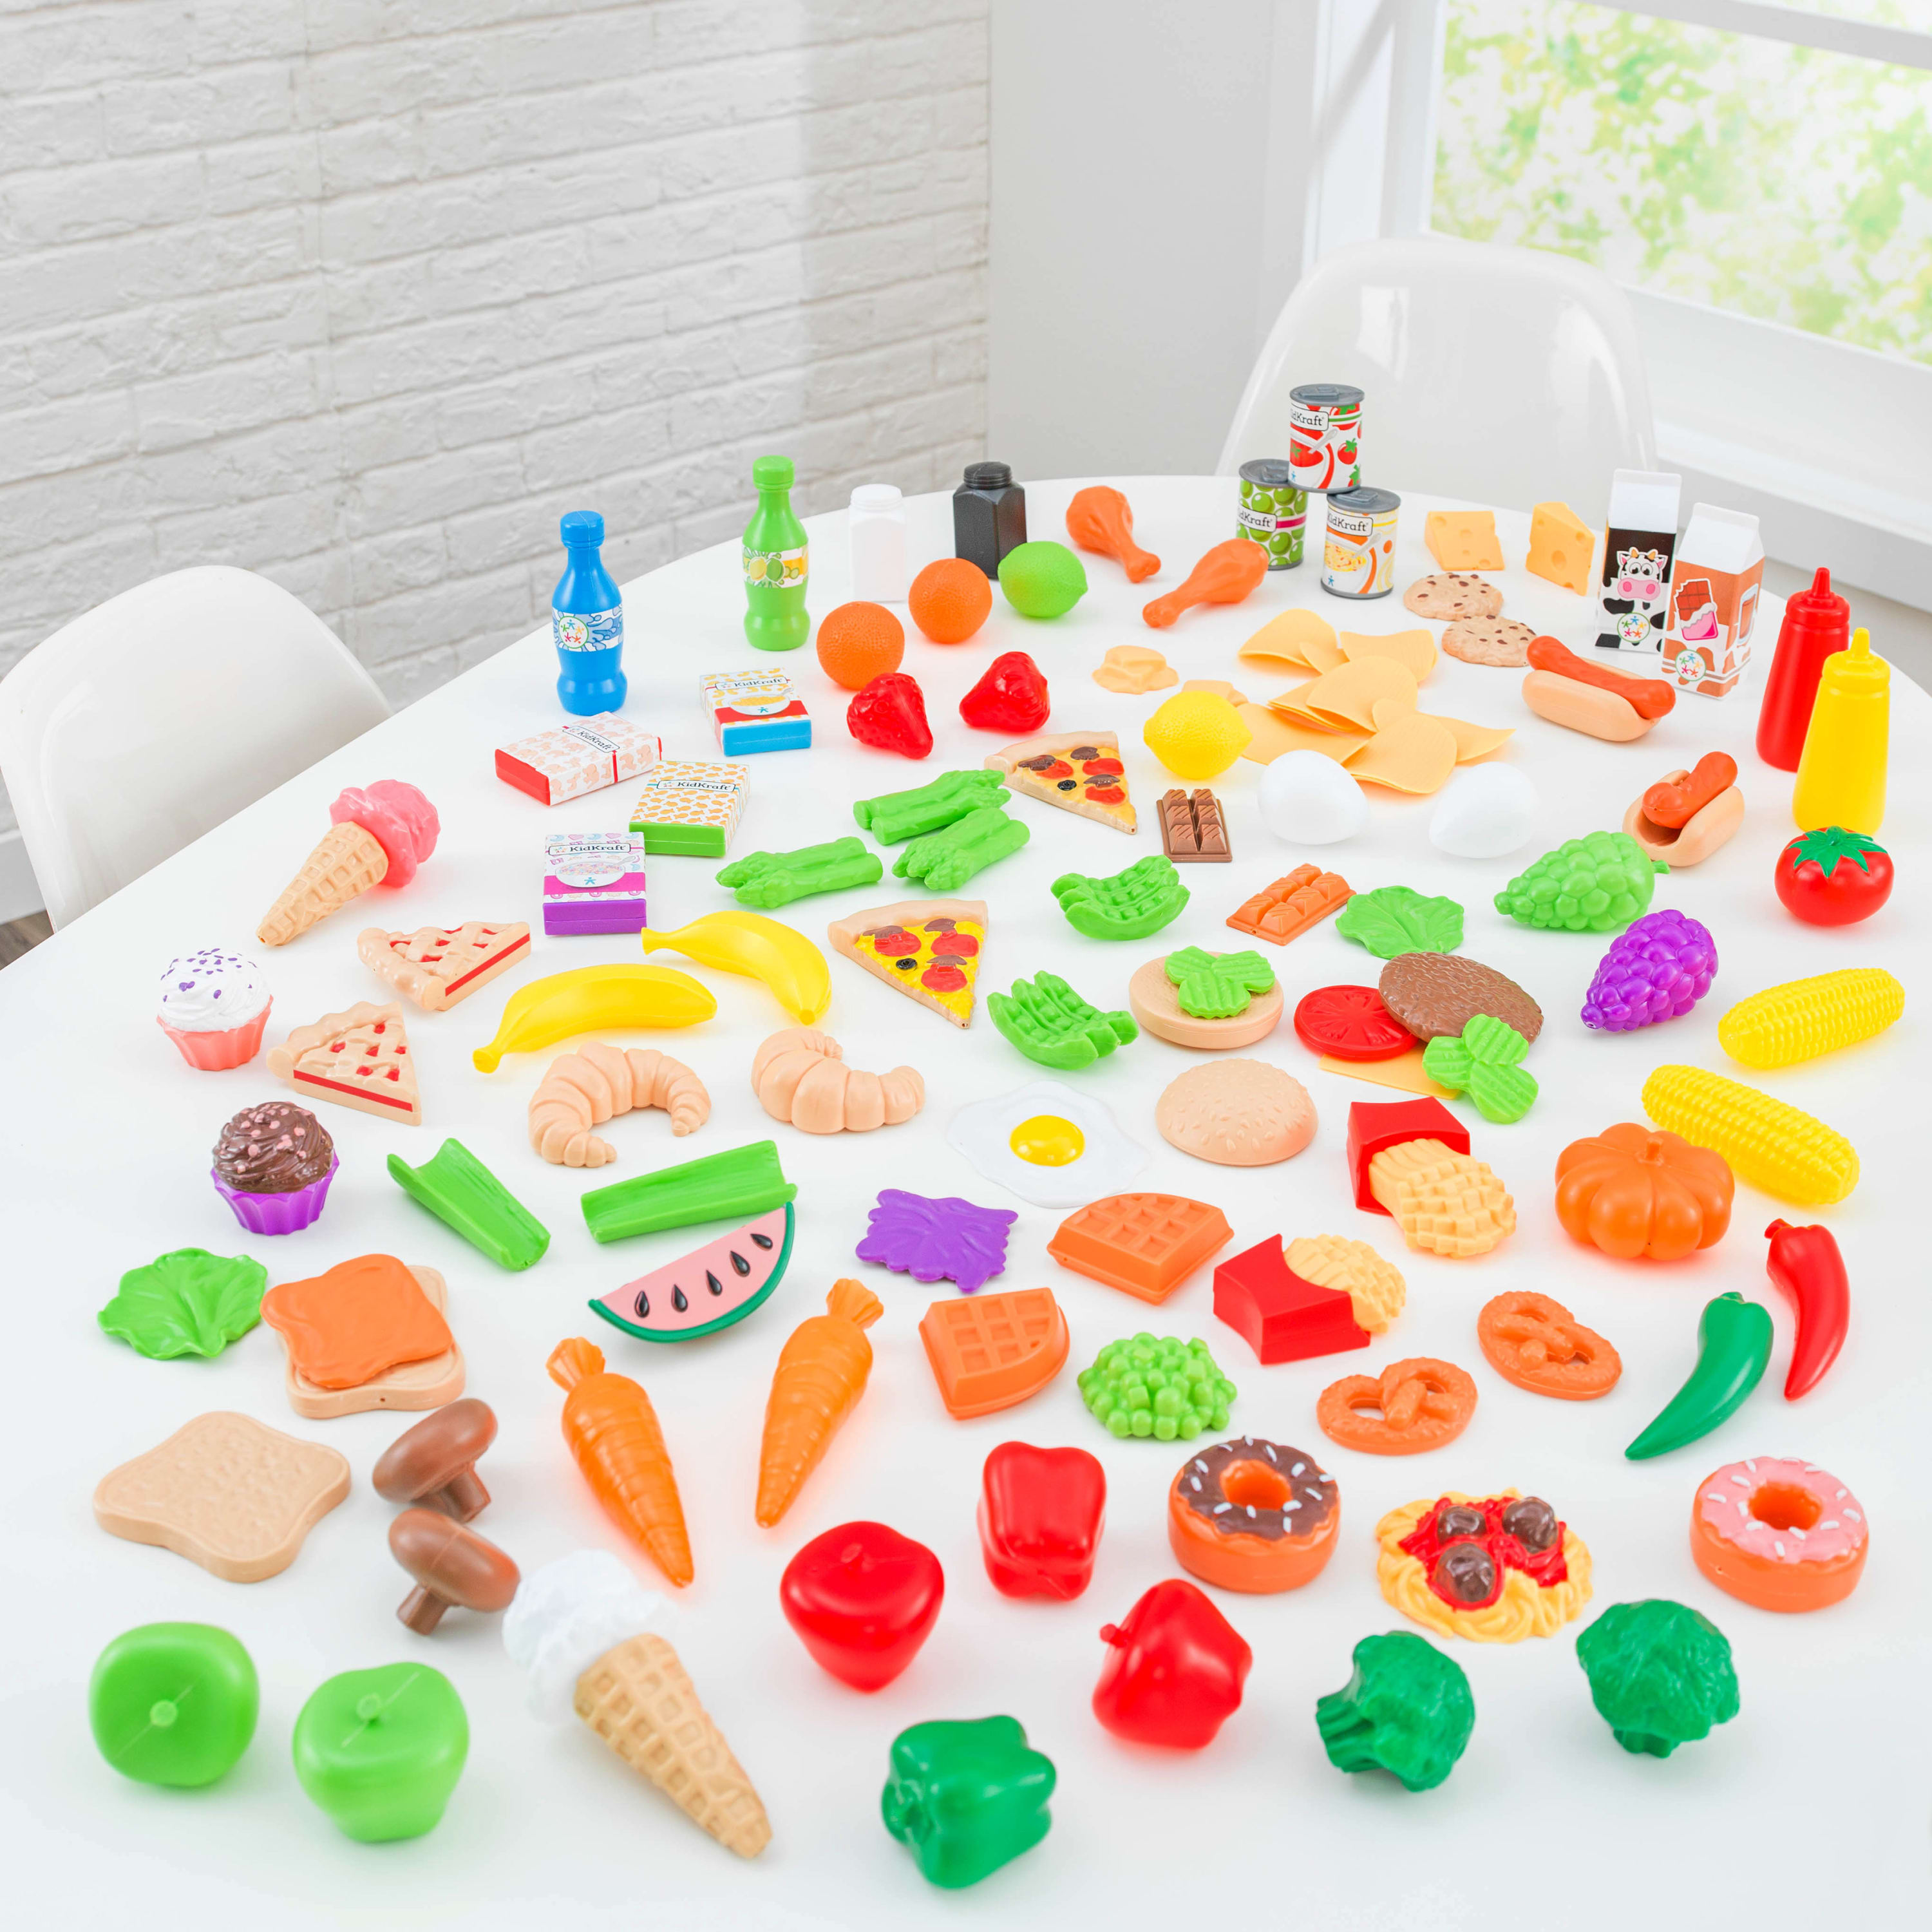 KidKraft 115-Piece Deluxe Tasty Treats Play Food Set, Plastic Grocery and Pantry Items - image 6 of 6